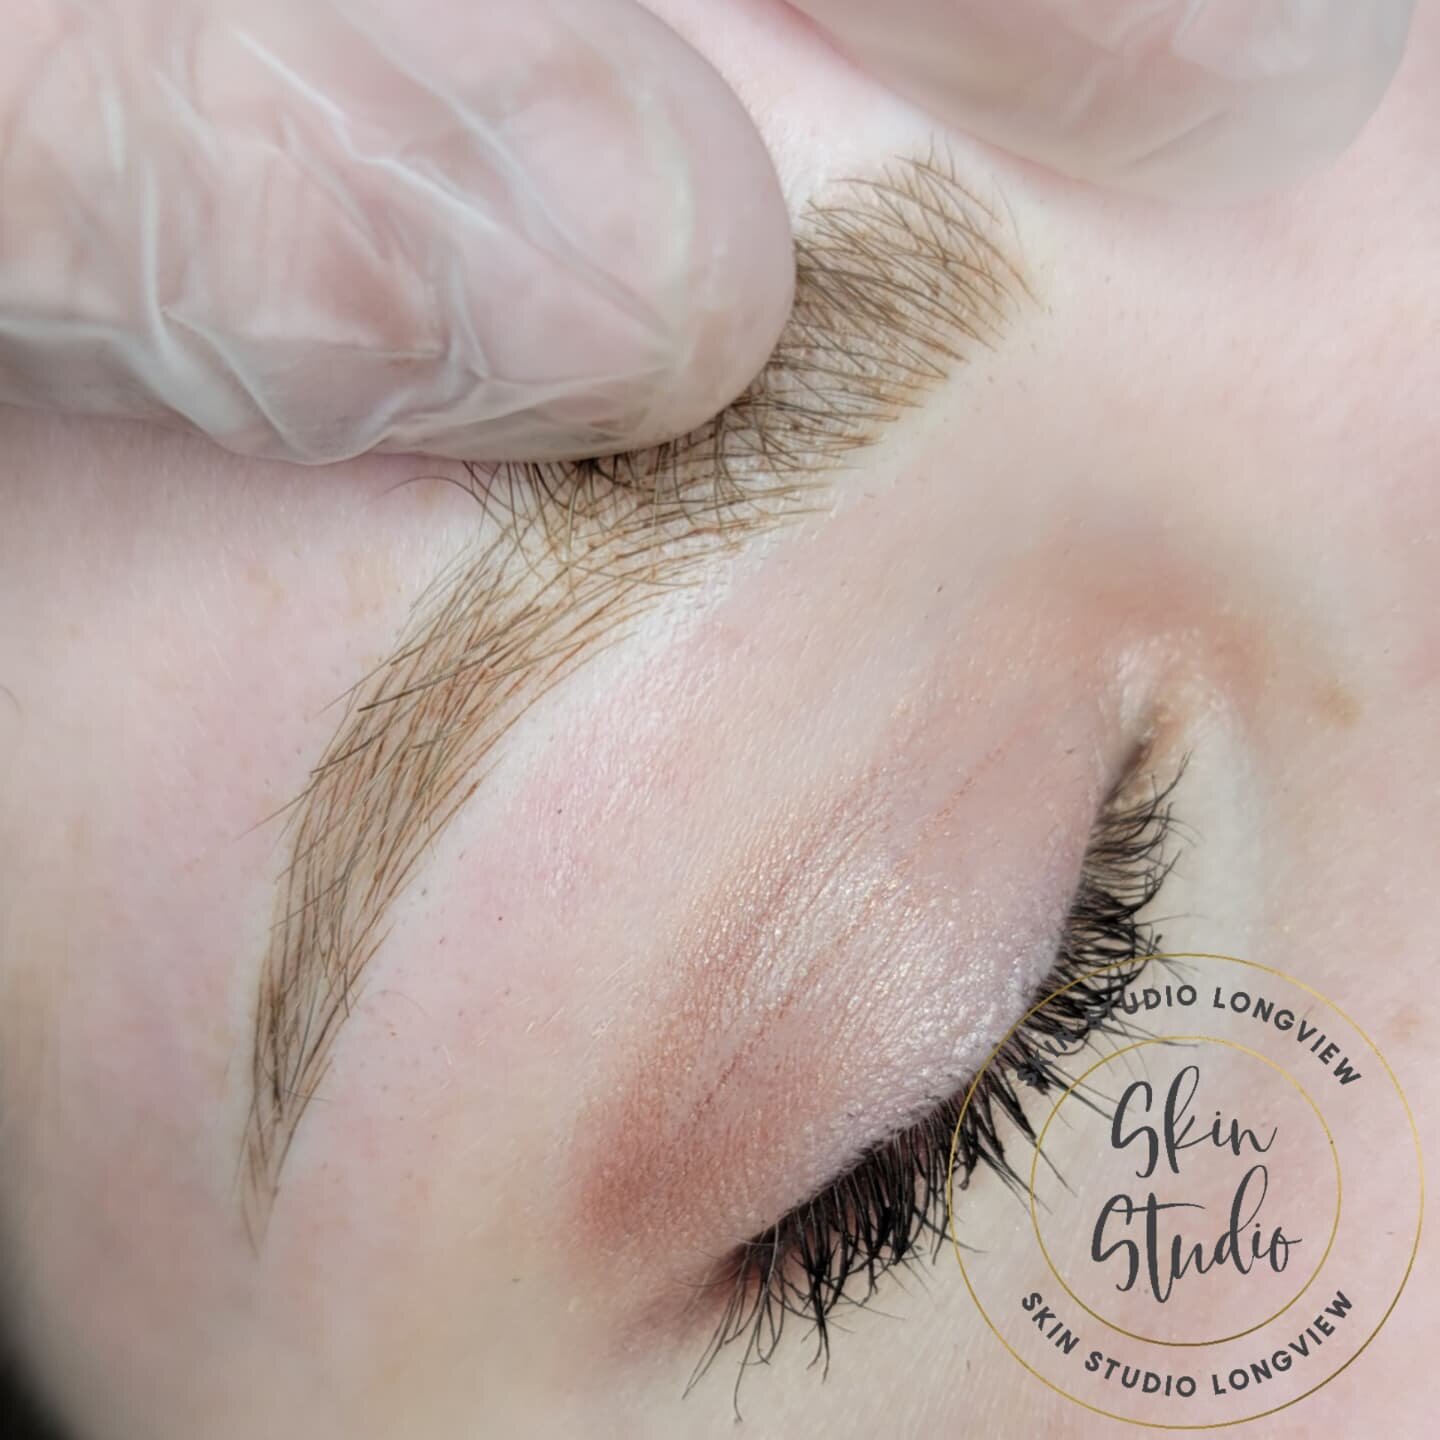 Close-up of microblading 🔎 
𝑩𝒐𝒐𝒌𝒊𝒏𝒈, 𝑭𝑨𝑸𝒔, 𝒎𝒐𝒓𝒆 𝒊𝒏𝒇𝒐 👇
www.skinstudiolongview.com
𝑪𝒐𝒏𝒕𝒂𝒄𝒕 𝒎𝒆 👇
skinstudiolongview@gmail.com

&bull;
&bull;
&bull;
&bull;
&bull;
&bull;
&bull;
&bull; #perfecteyebrows#beautiful#instabrows#